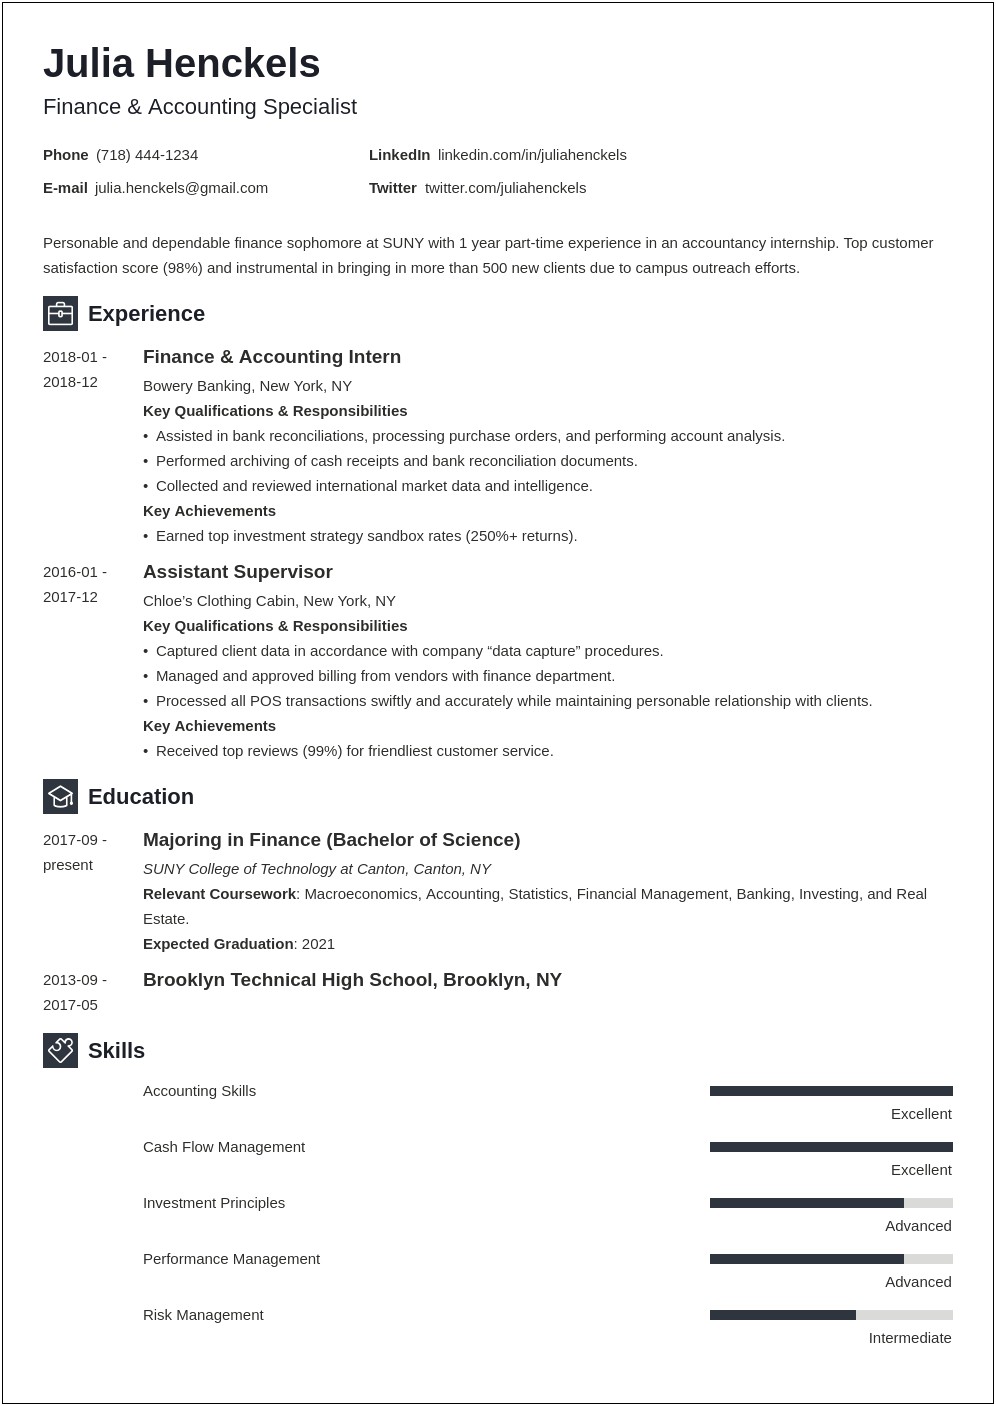 Resume Professional Summary For College Student